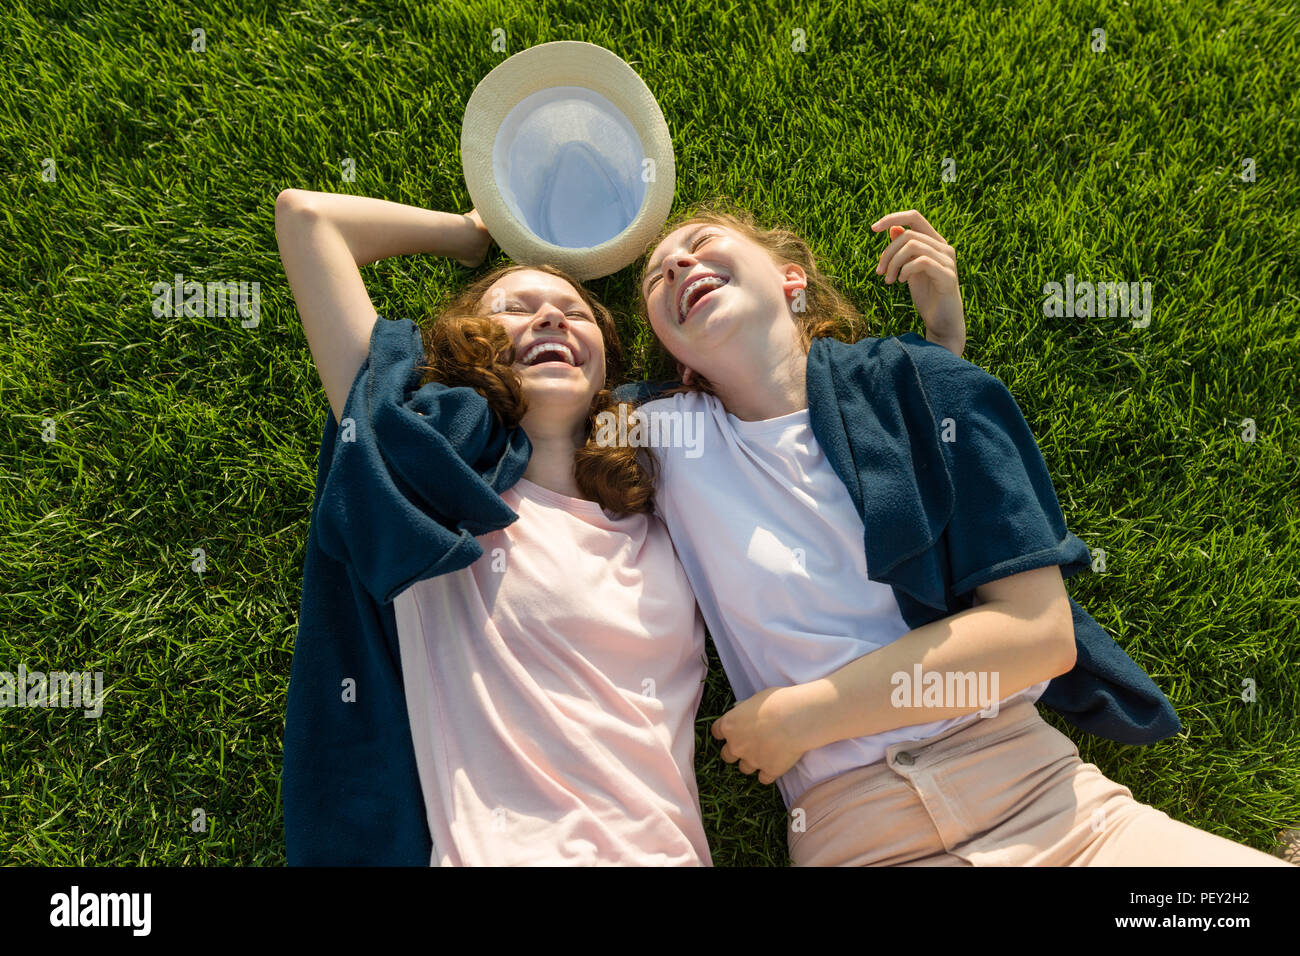 Girls teenagers having fun, lie on the green grass, laughing, top view Stock Photo